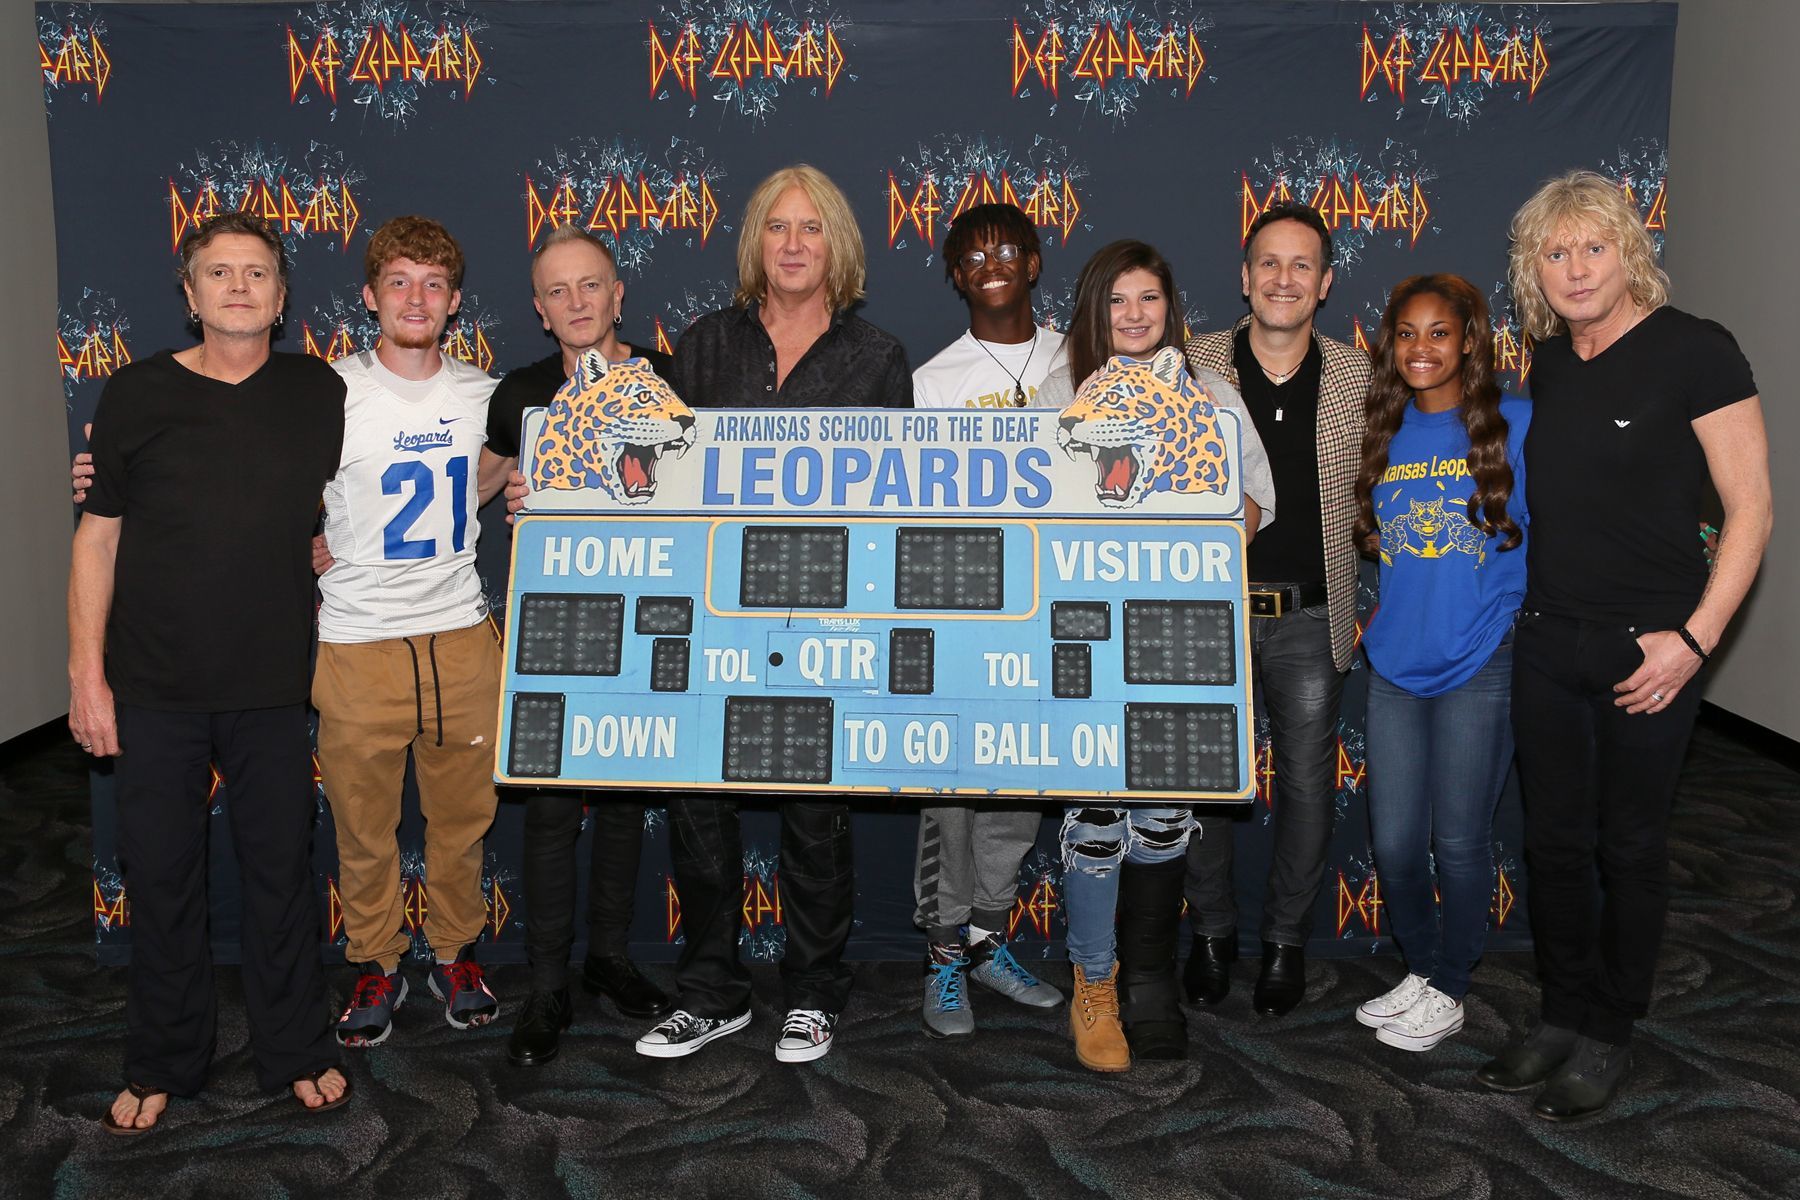 From left, Def Leppard drummer Rick Allen, student Stephen Cathcart, guitarist Phil Collen, lead singer Joe Elliott, student Henry James, student Alex Gossett, guitarist Vivian Campbell, student Jewel Brandon and bassist Rick Savage pose with a replica of the scoreboard from the Arkansas School for the Deaf, before a concert in North Little Rock, Ark.